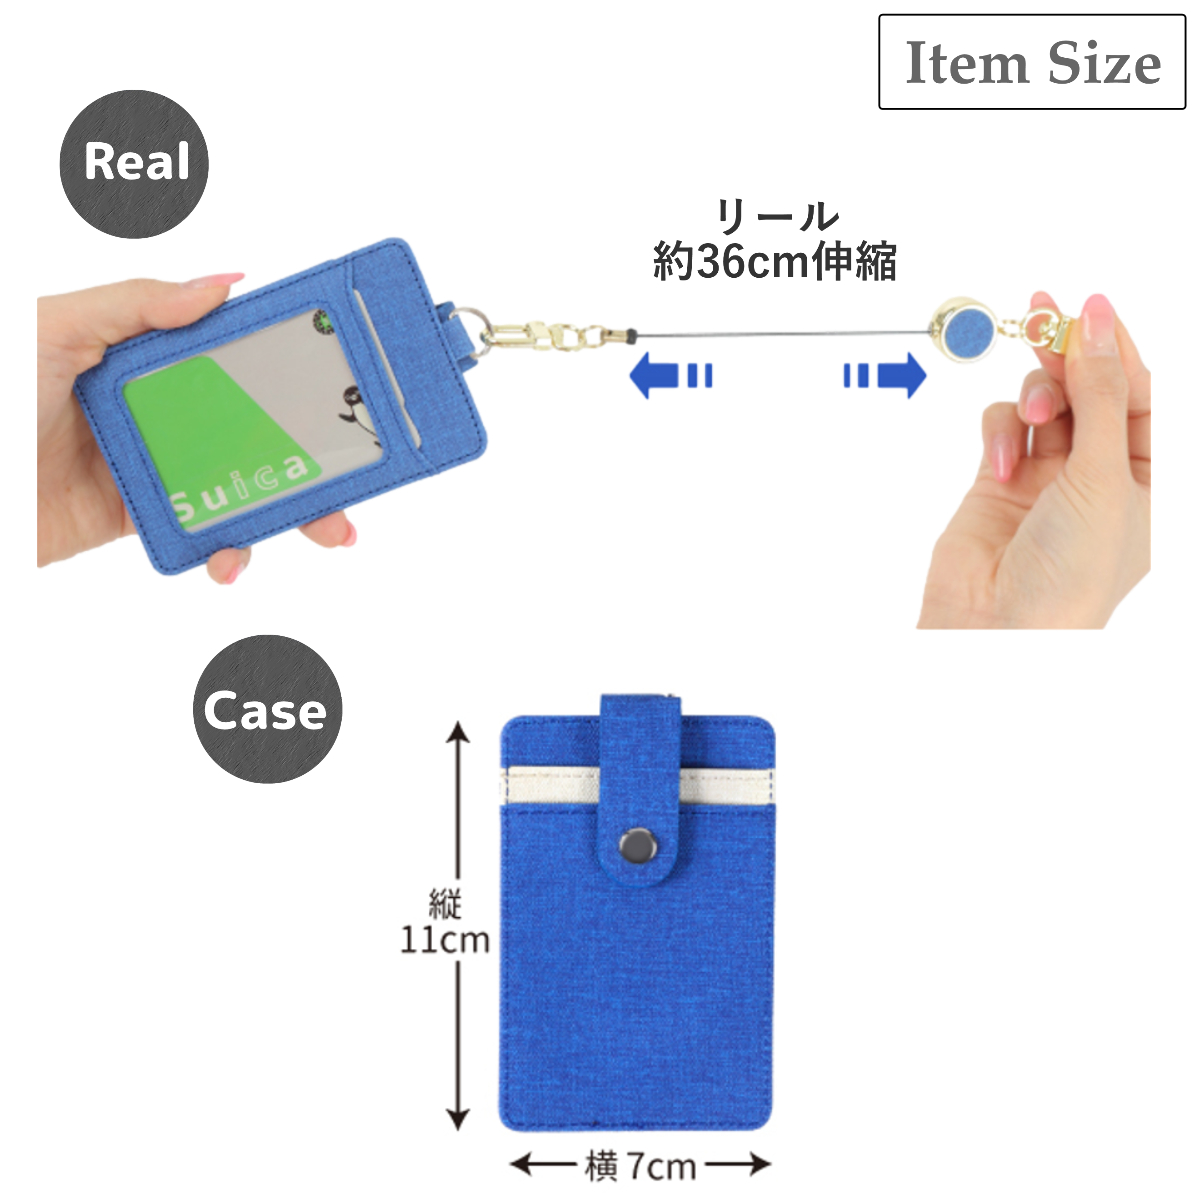  pass case reel attaching strap thin type ticket holder card holder card-case neck strap lovely lady's men's stylish student society person commuting going to school 